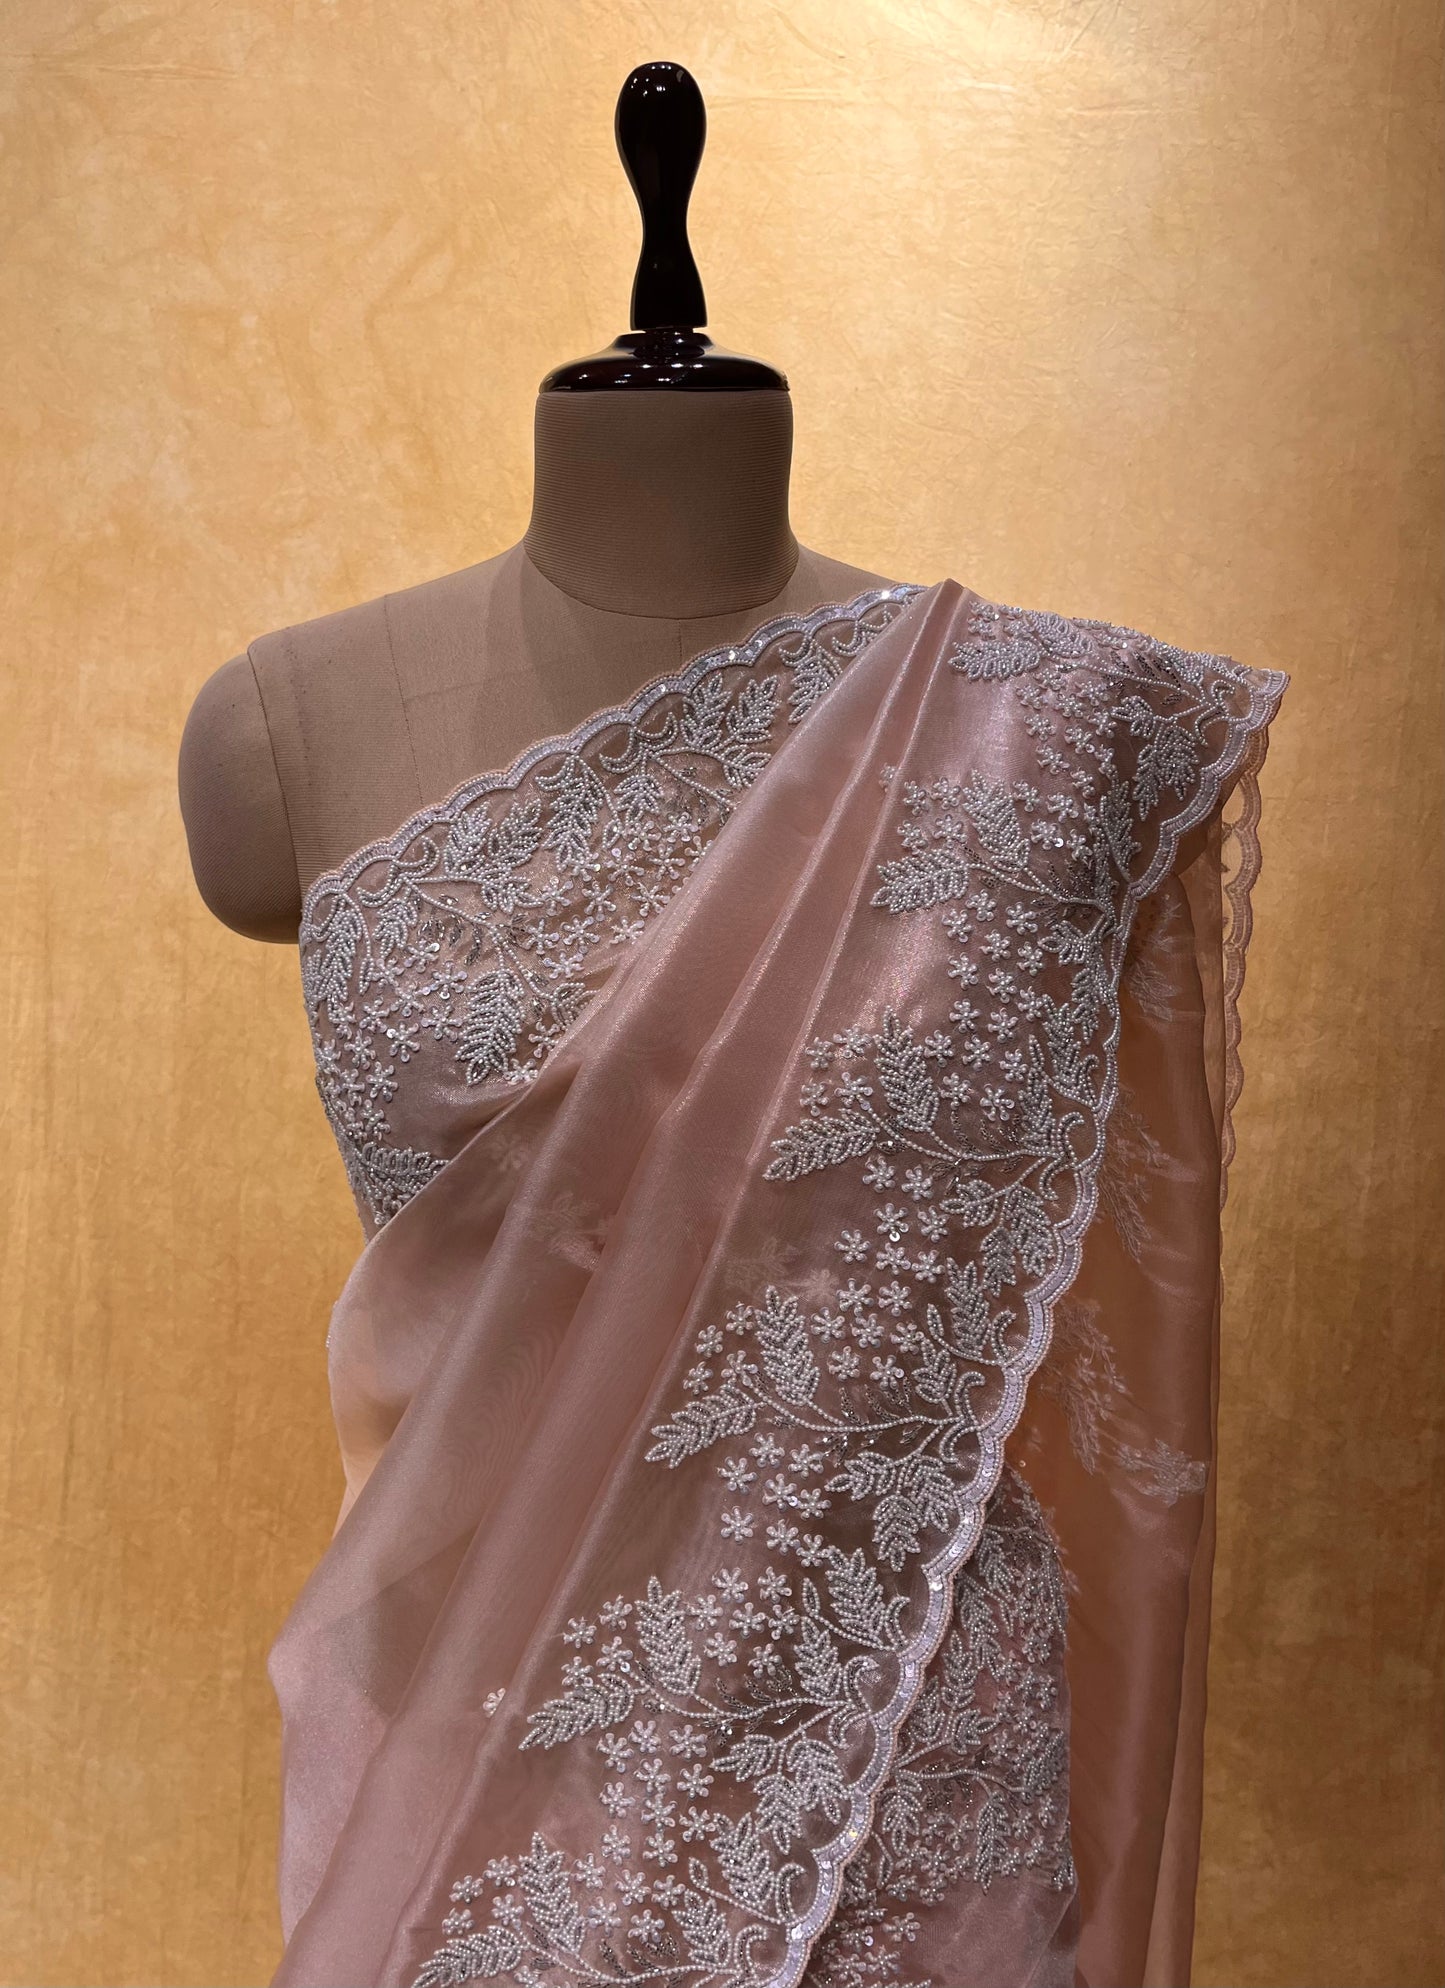 PINK GOLOUR ORGANZA TISSUE HAND EMBROIDERED SAREE EMBELLISHED WITH BEADS, CUTDANA & SEQUINS WORK